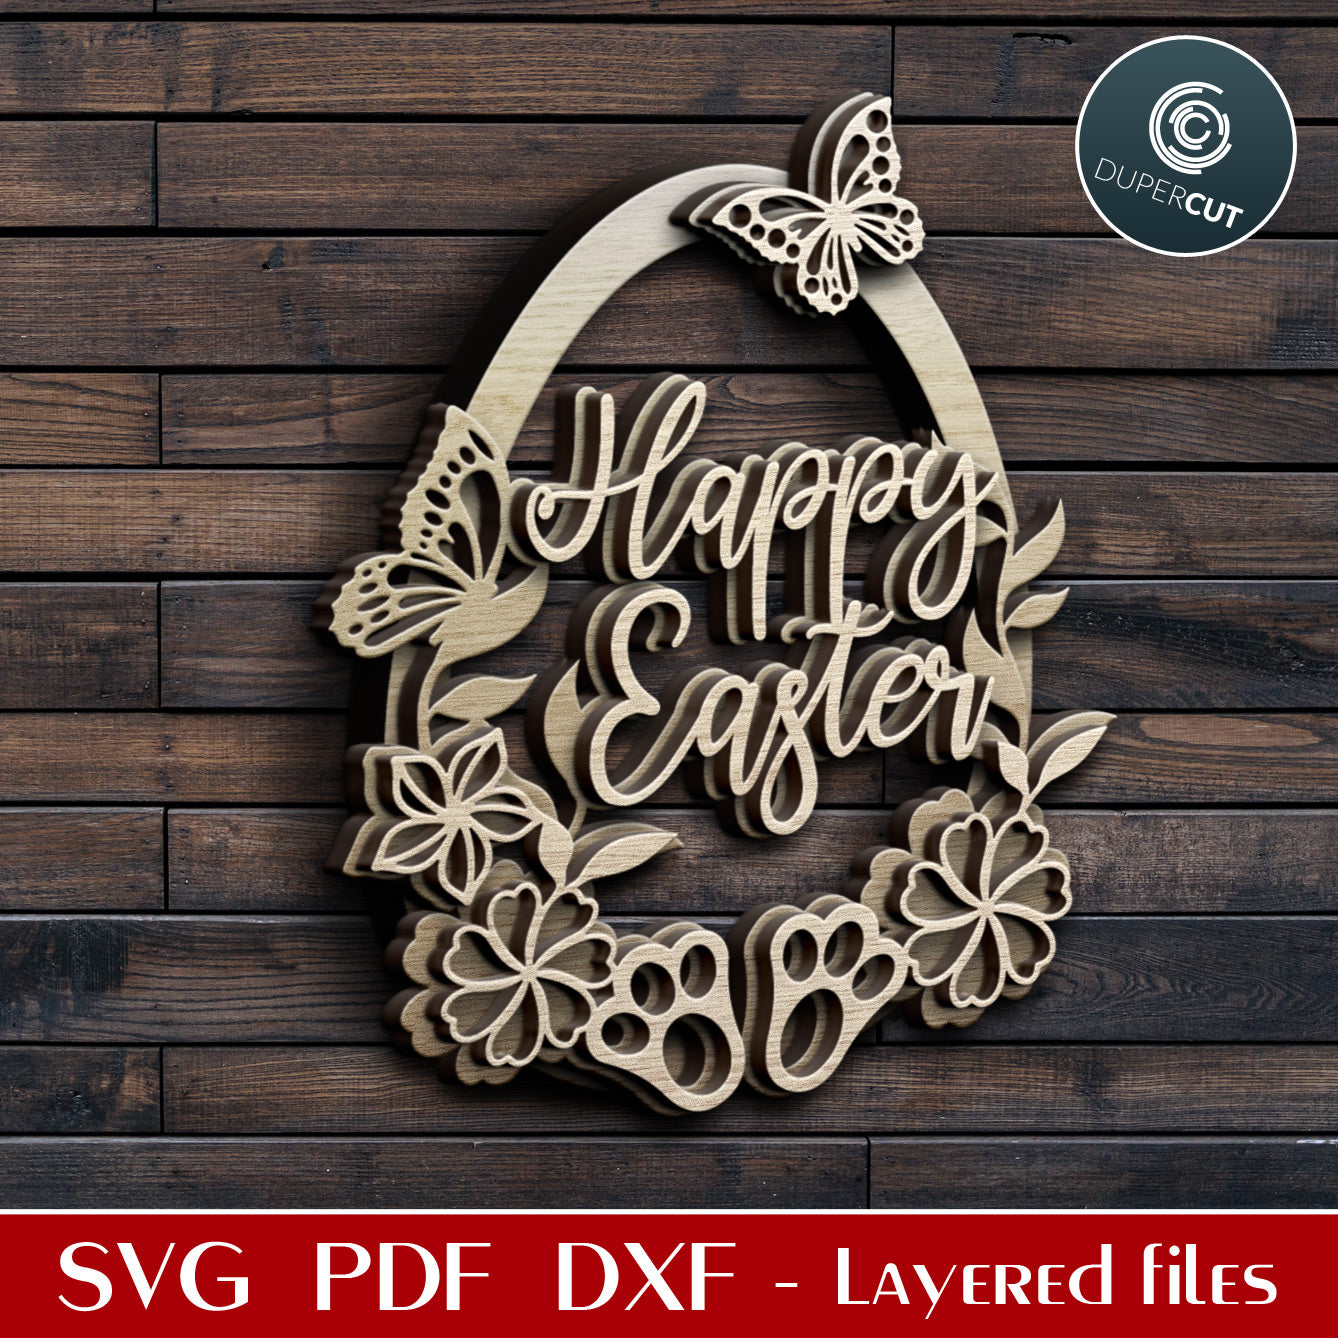 Happy Easter floral egg - SVG PDF DXF layered cutting files for Cricut, Silhouette Cameo, Glowforge laser, CNC plasma machines